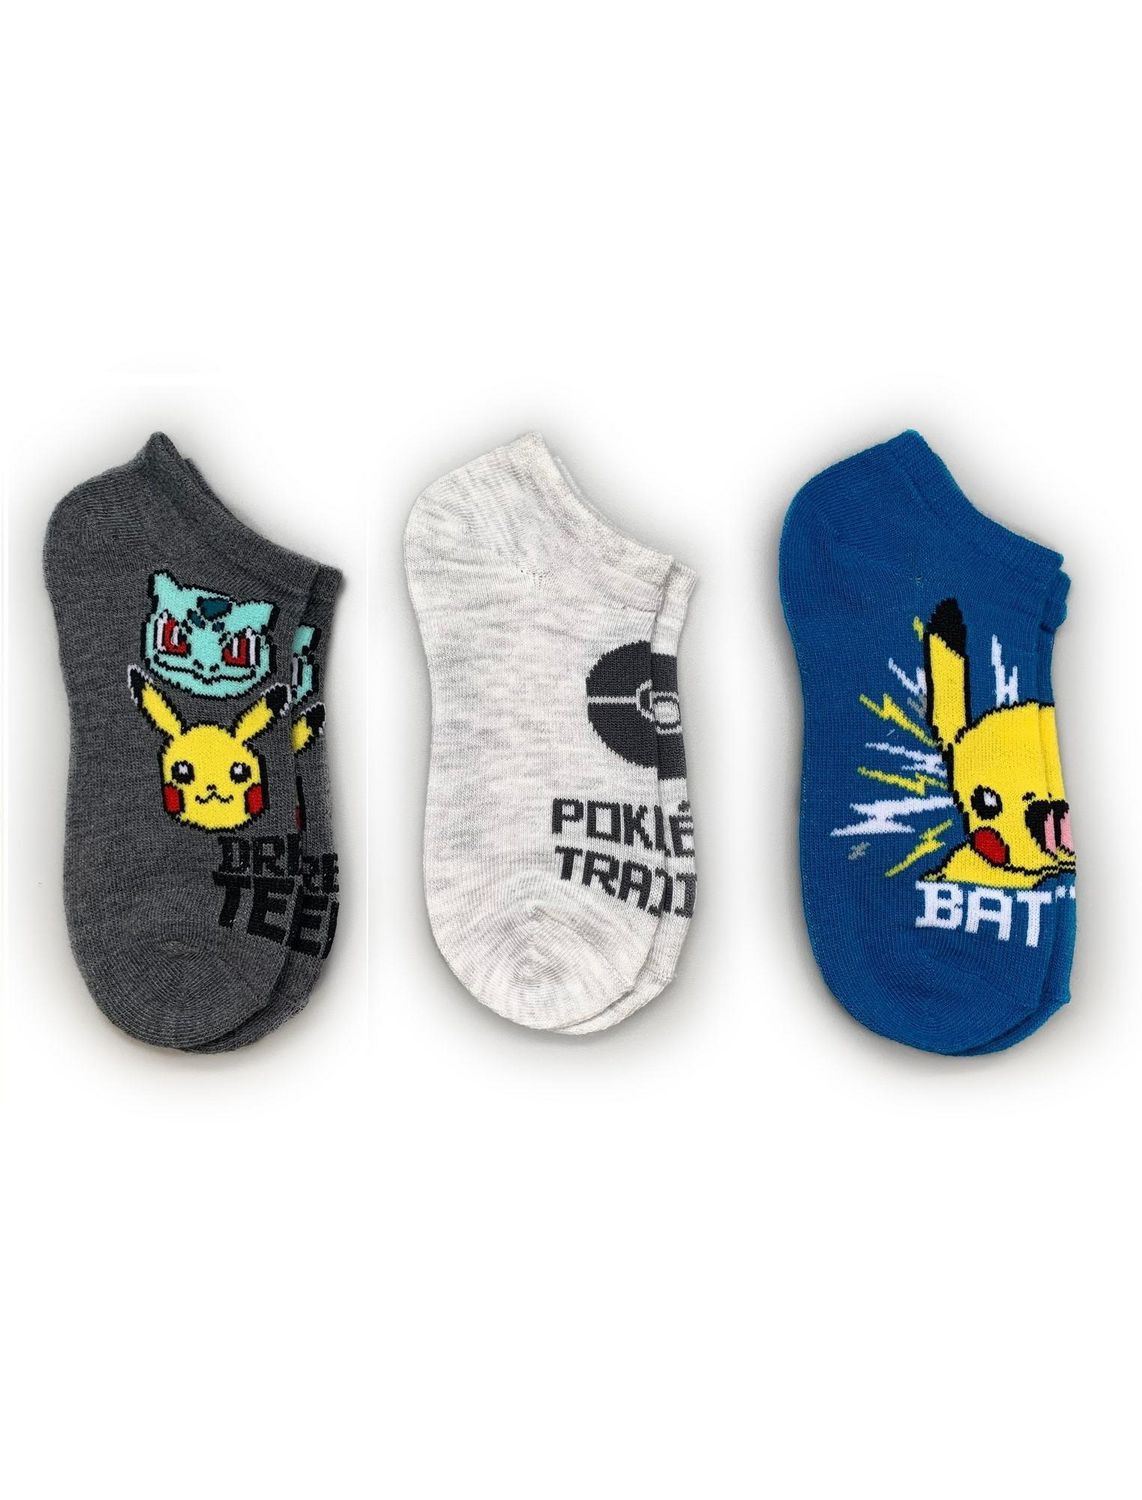 Chaussettes Lowcut Pokemon Boys, 3 Pack Tailles 11-2; 3-6 